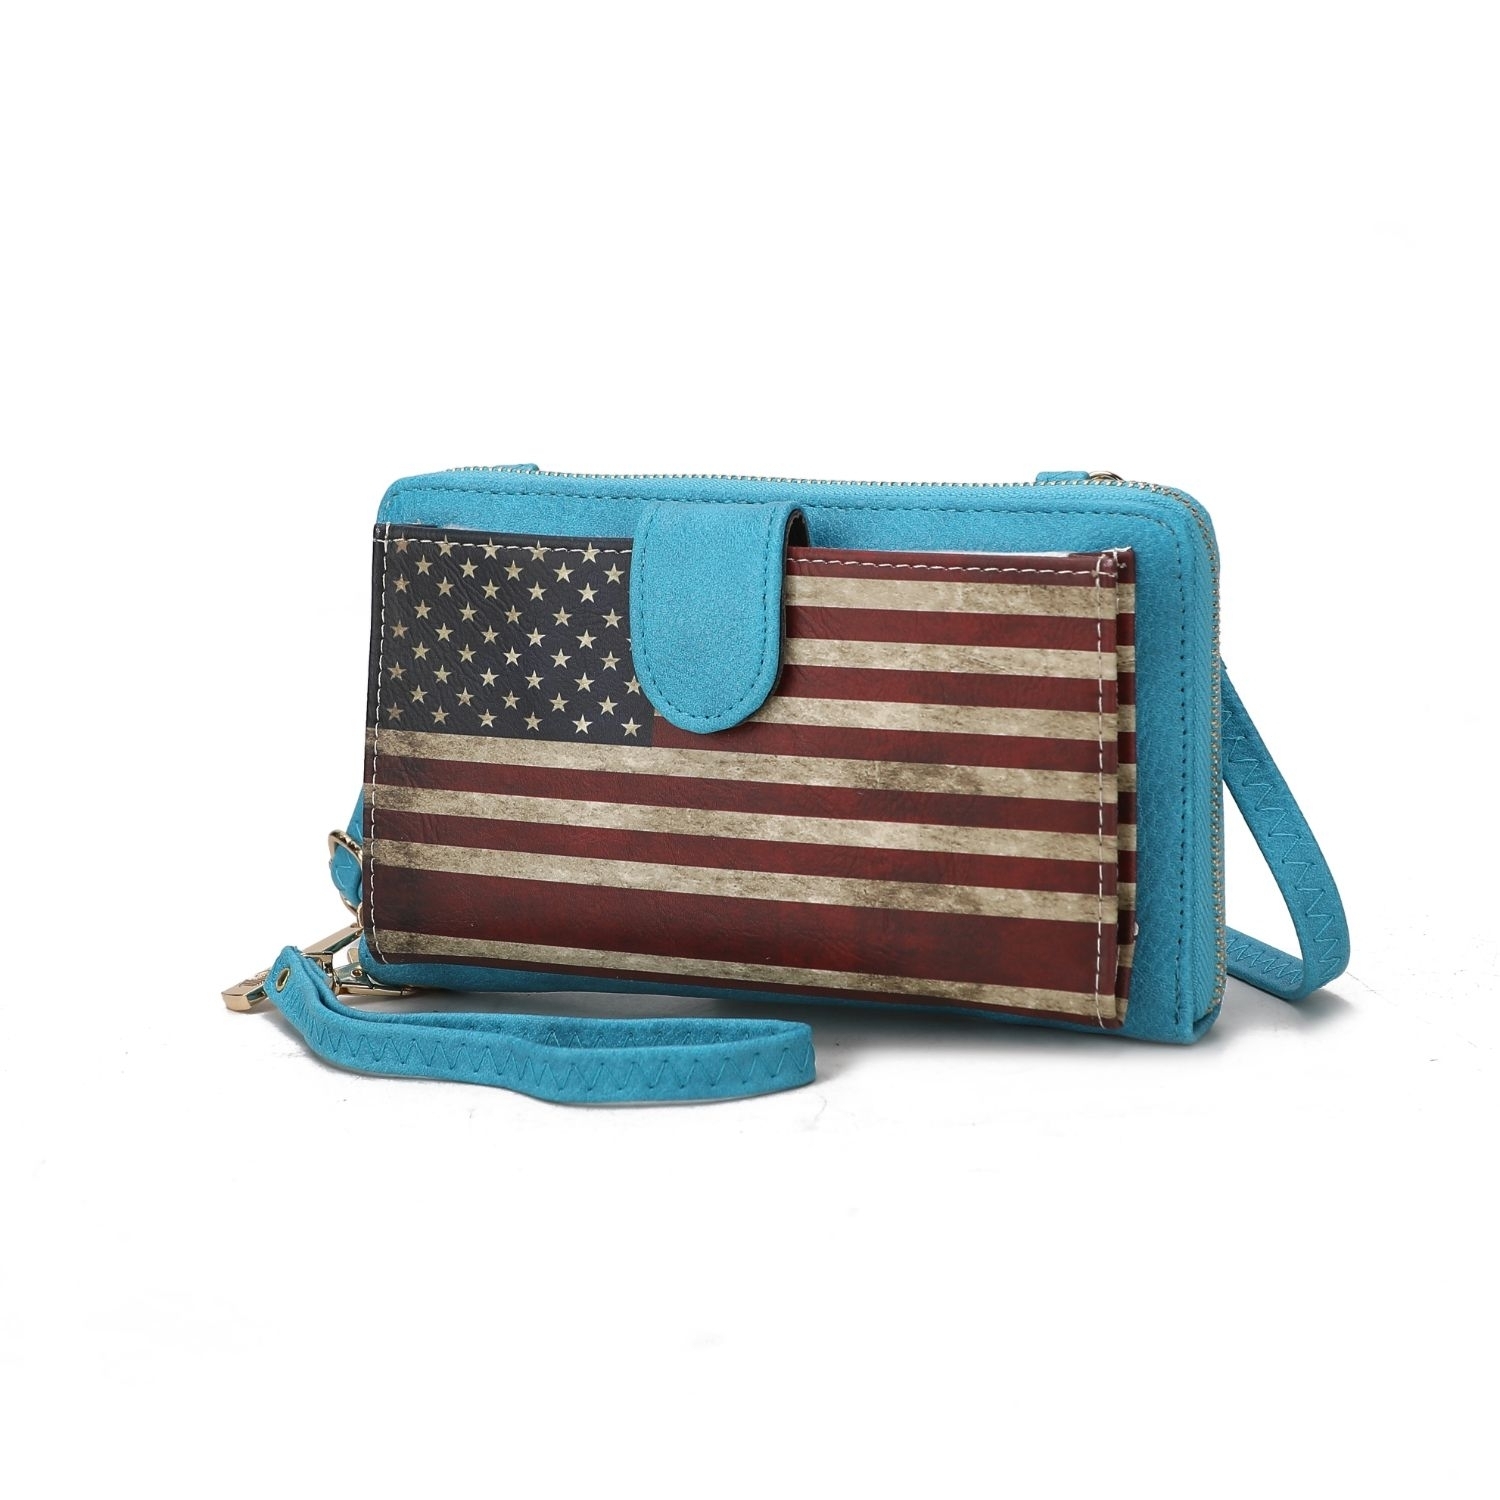 MKF Collection Kiara Smartphone And Wallet Convertible FLAG Crossbody Bag By Mia K - Turquoise